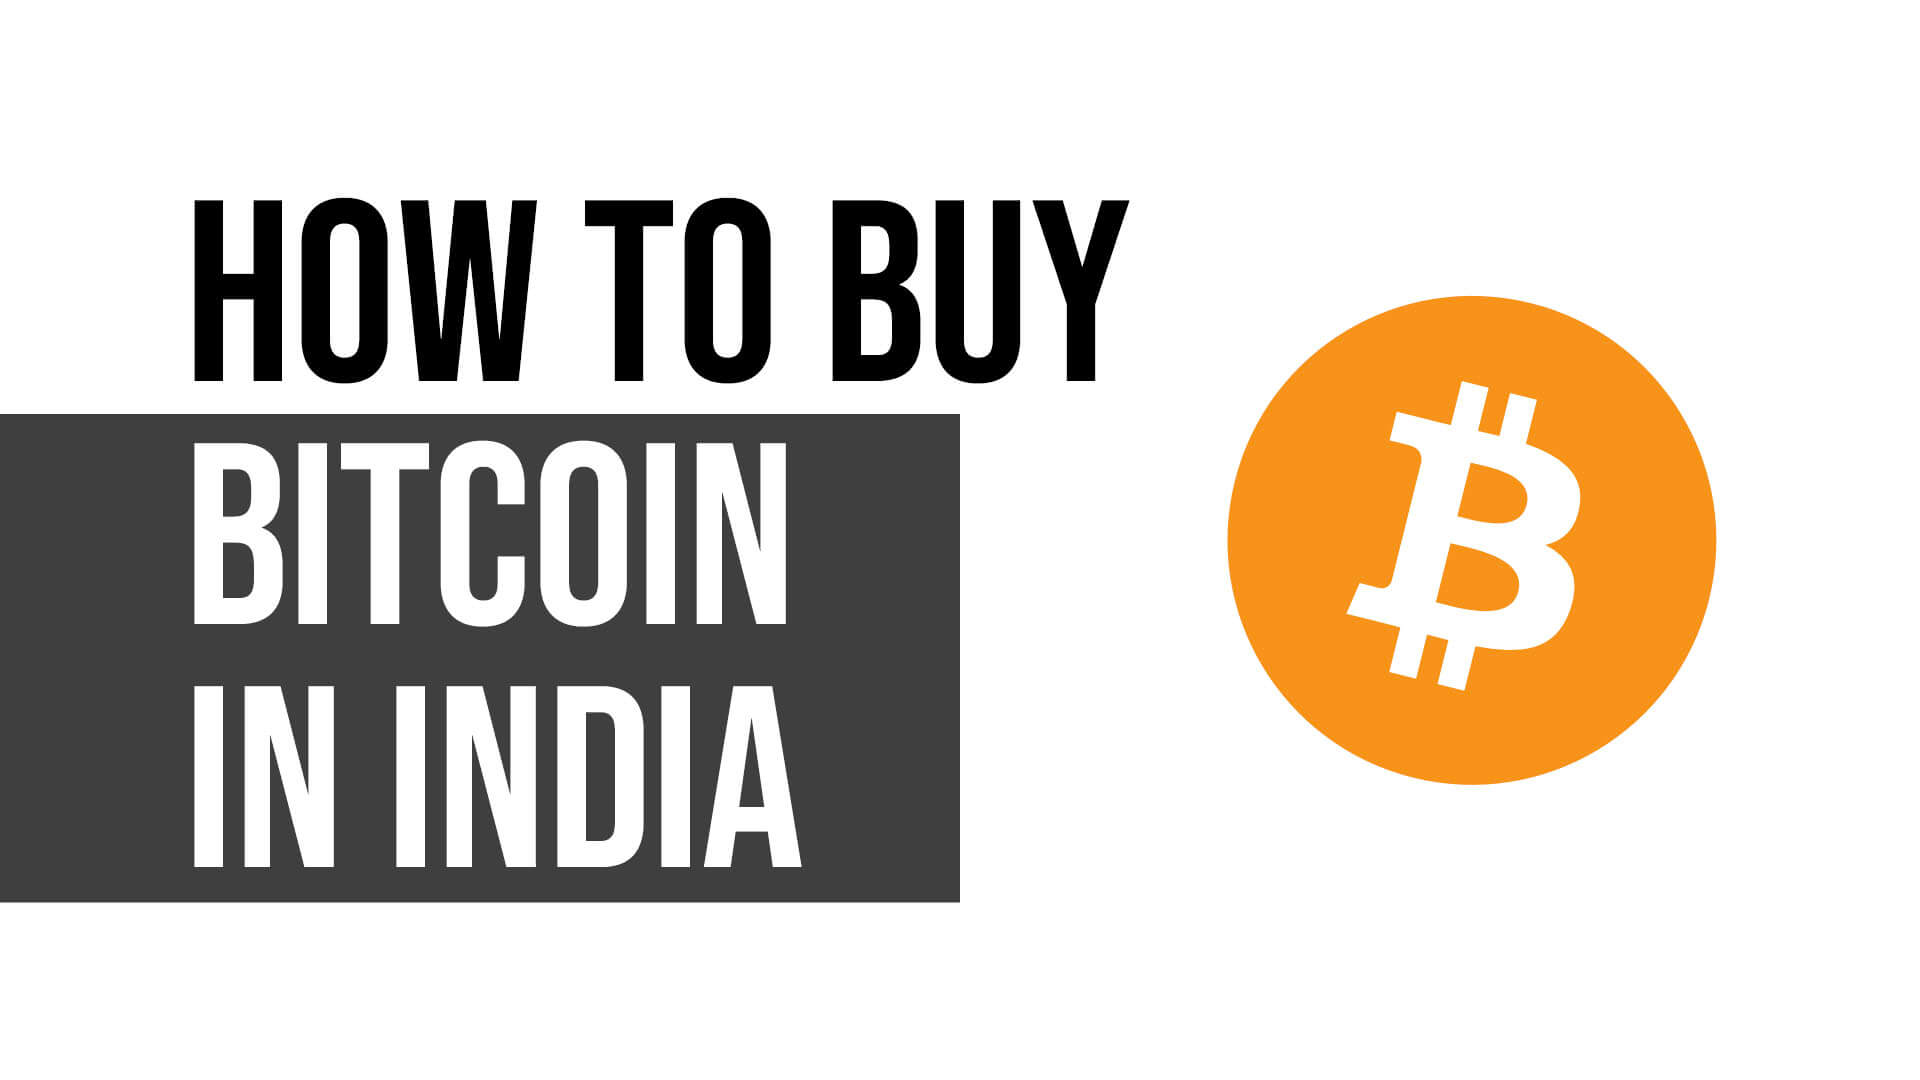 How to buy bitcoin in india without exchange blockchain and electronic health records